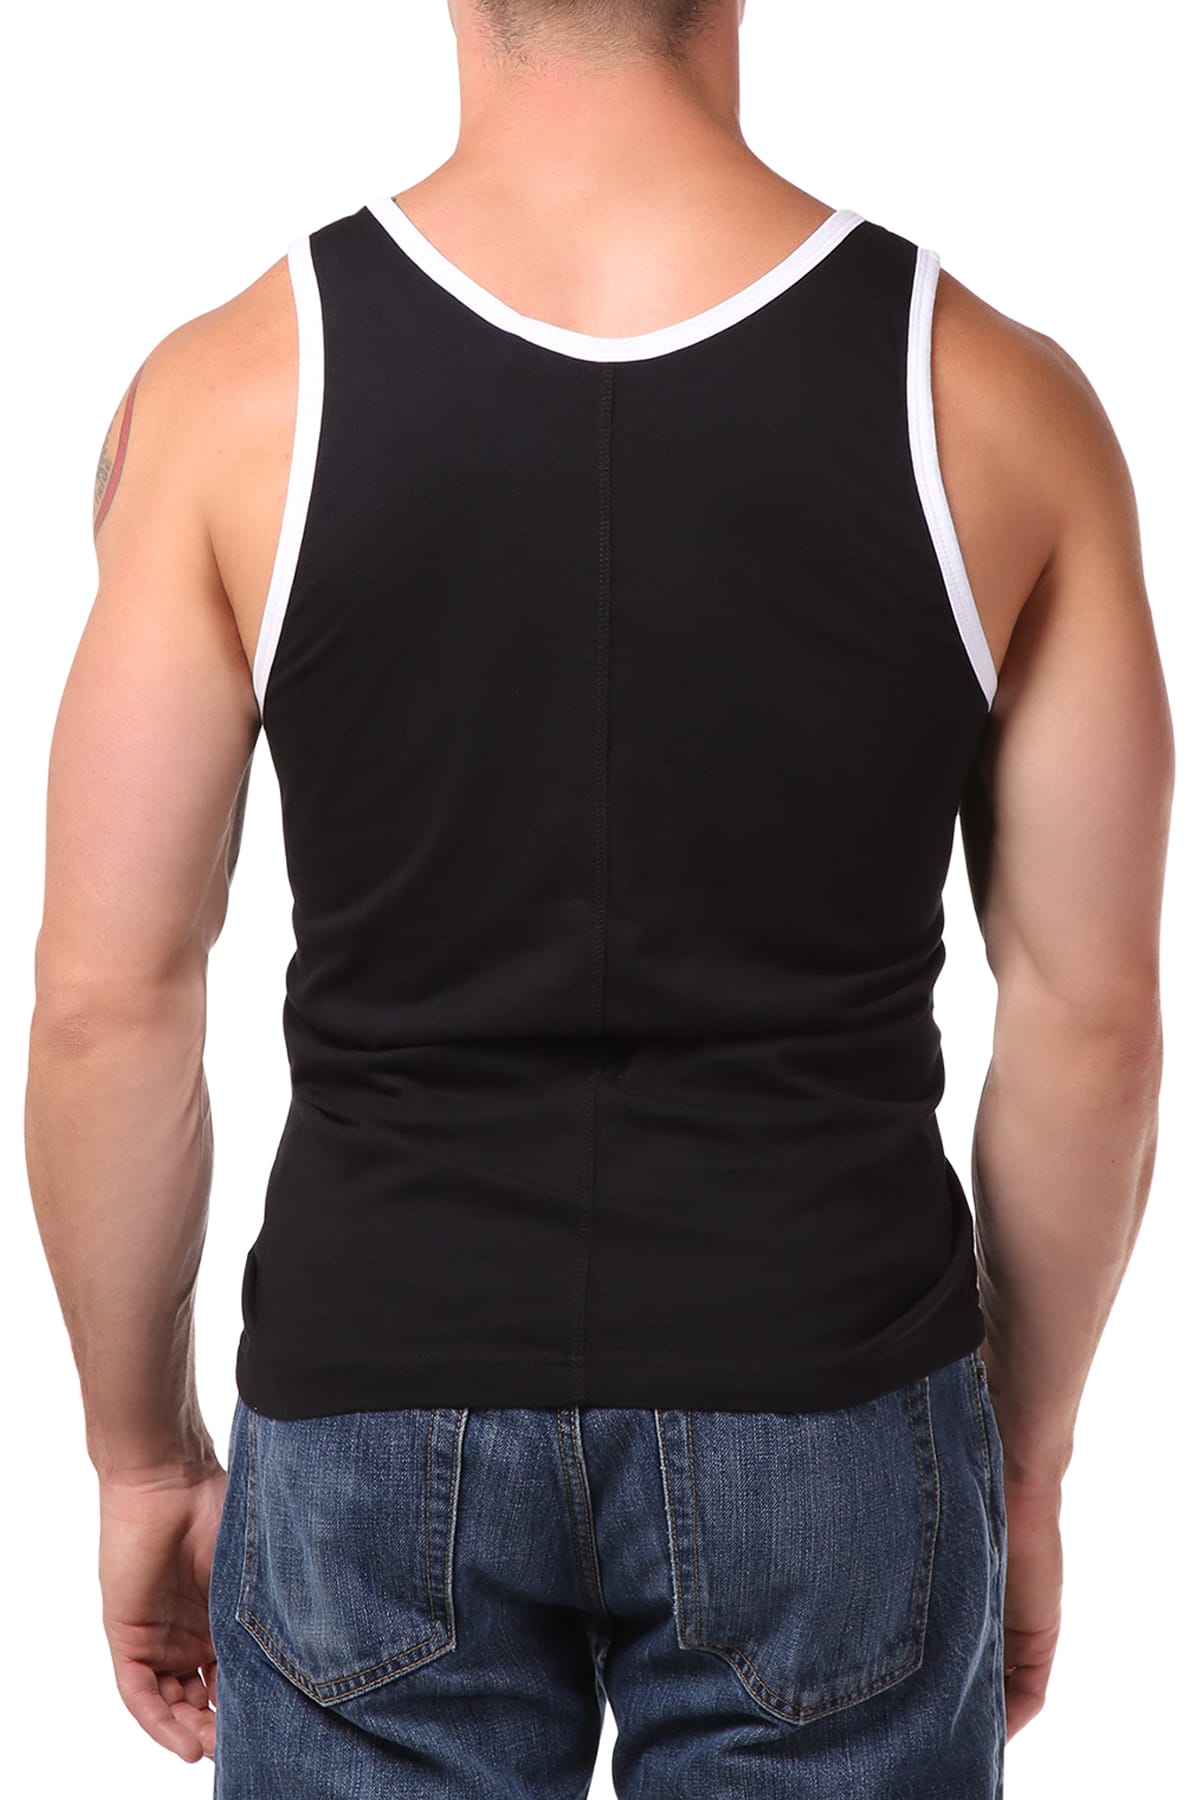 Datch Black All Rights Reserved Tank Top